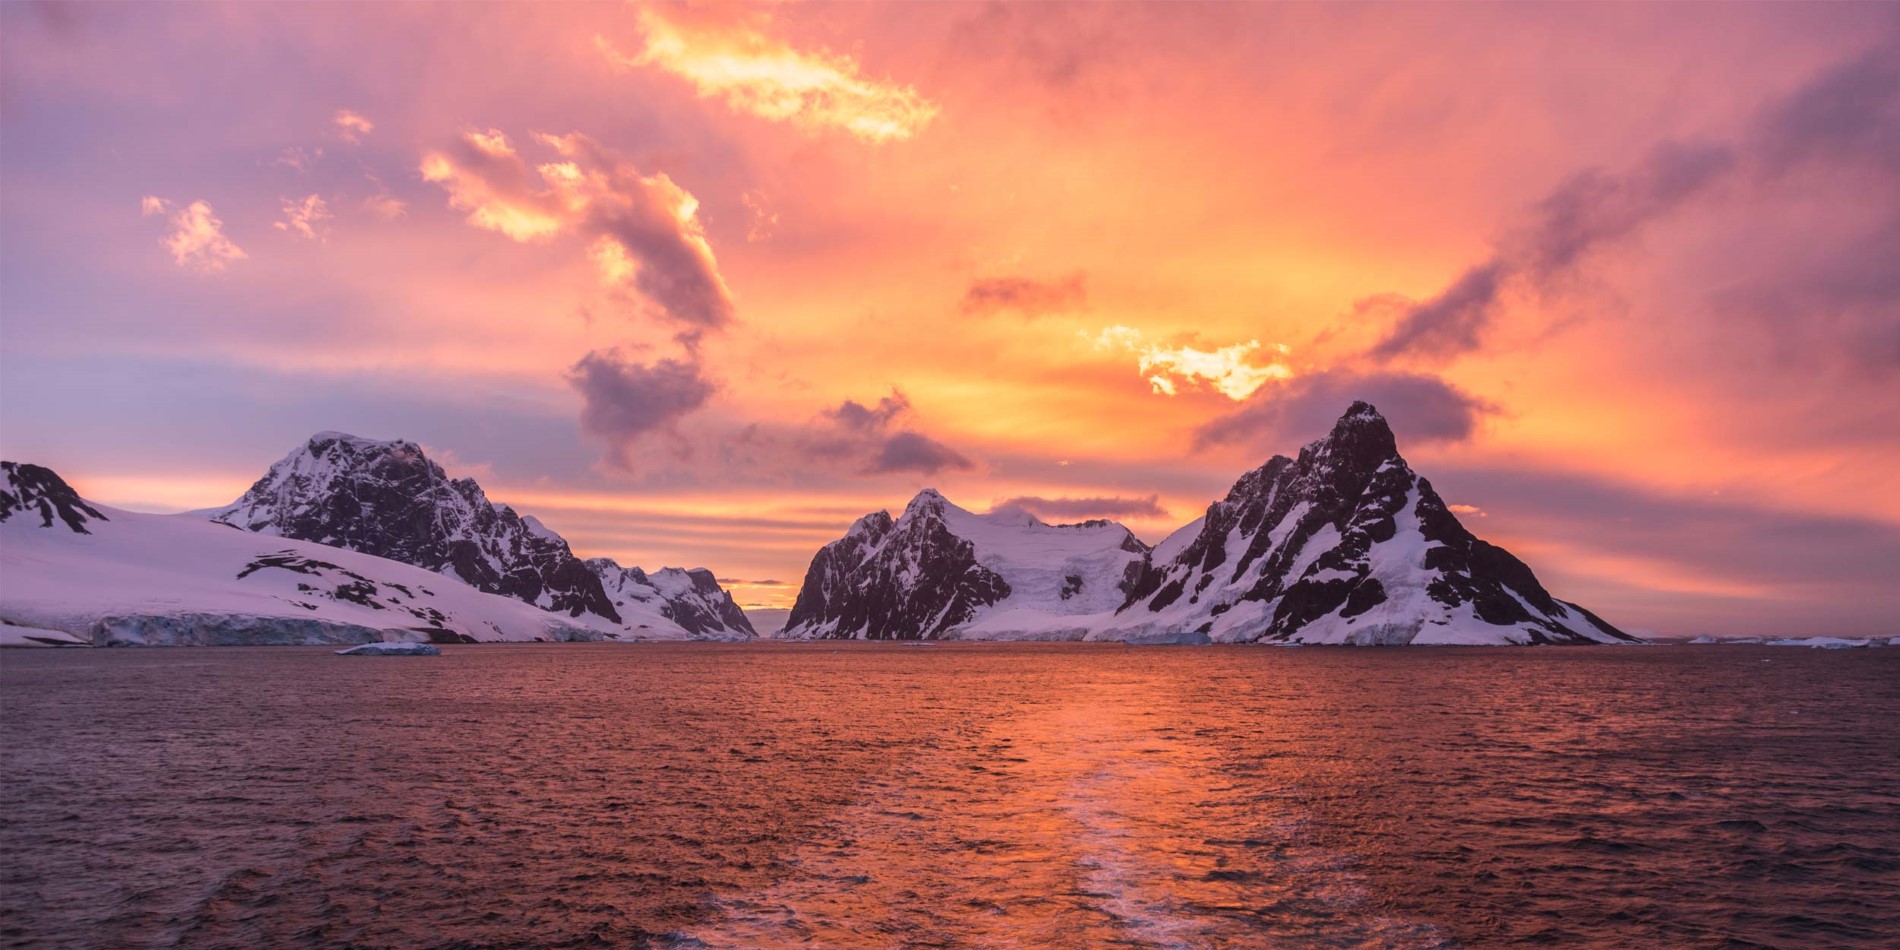 Sunset in the Lemaire Channel, Antarctica